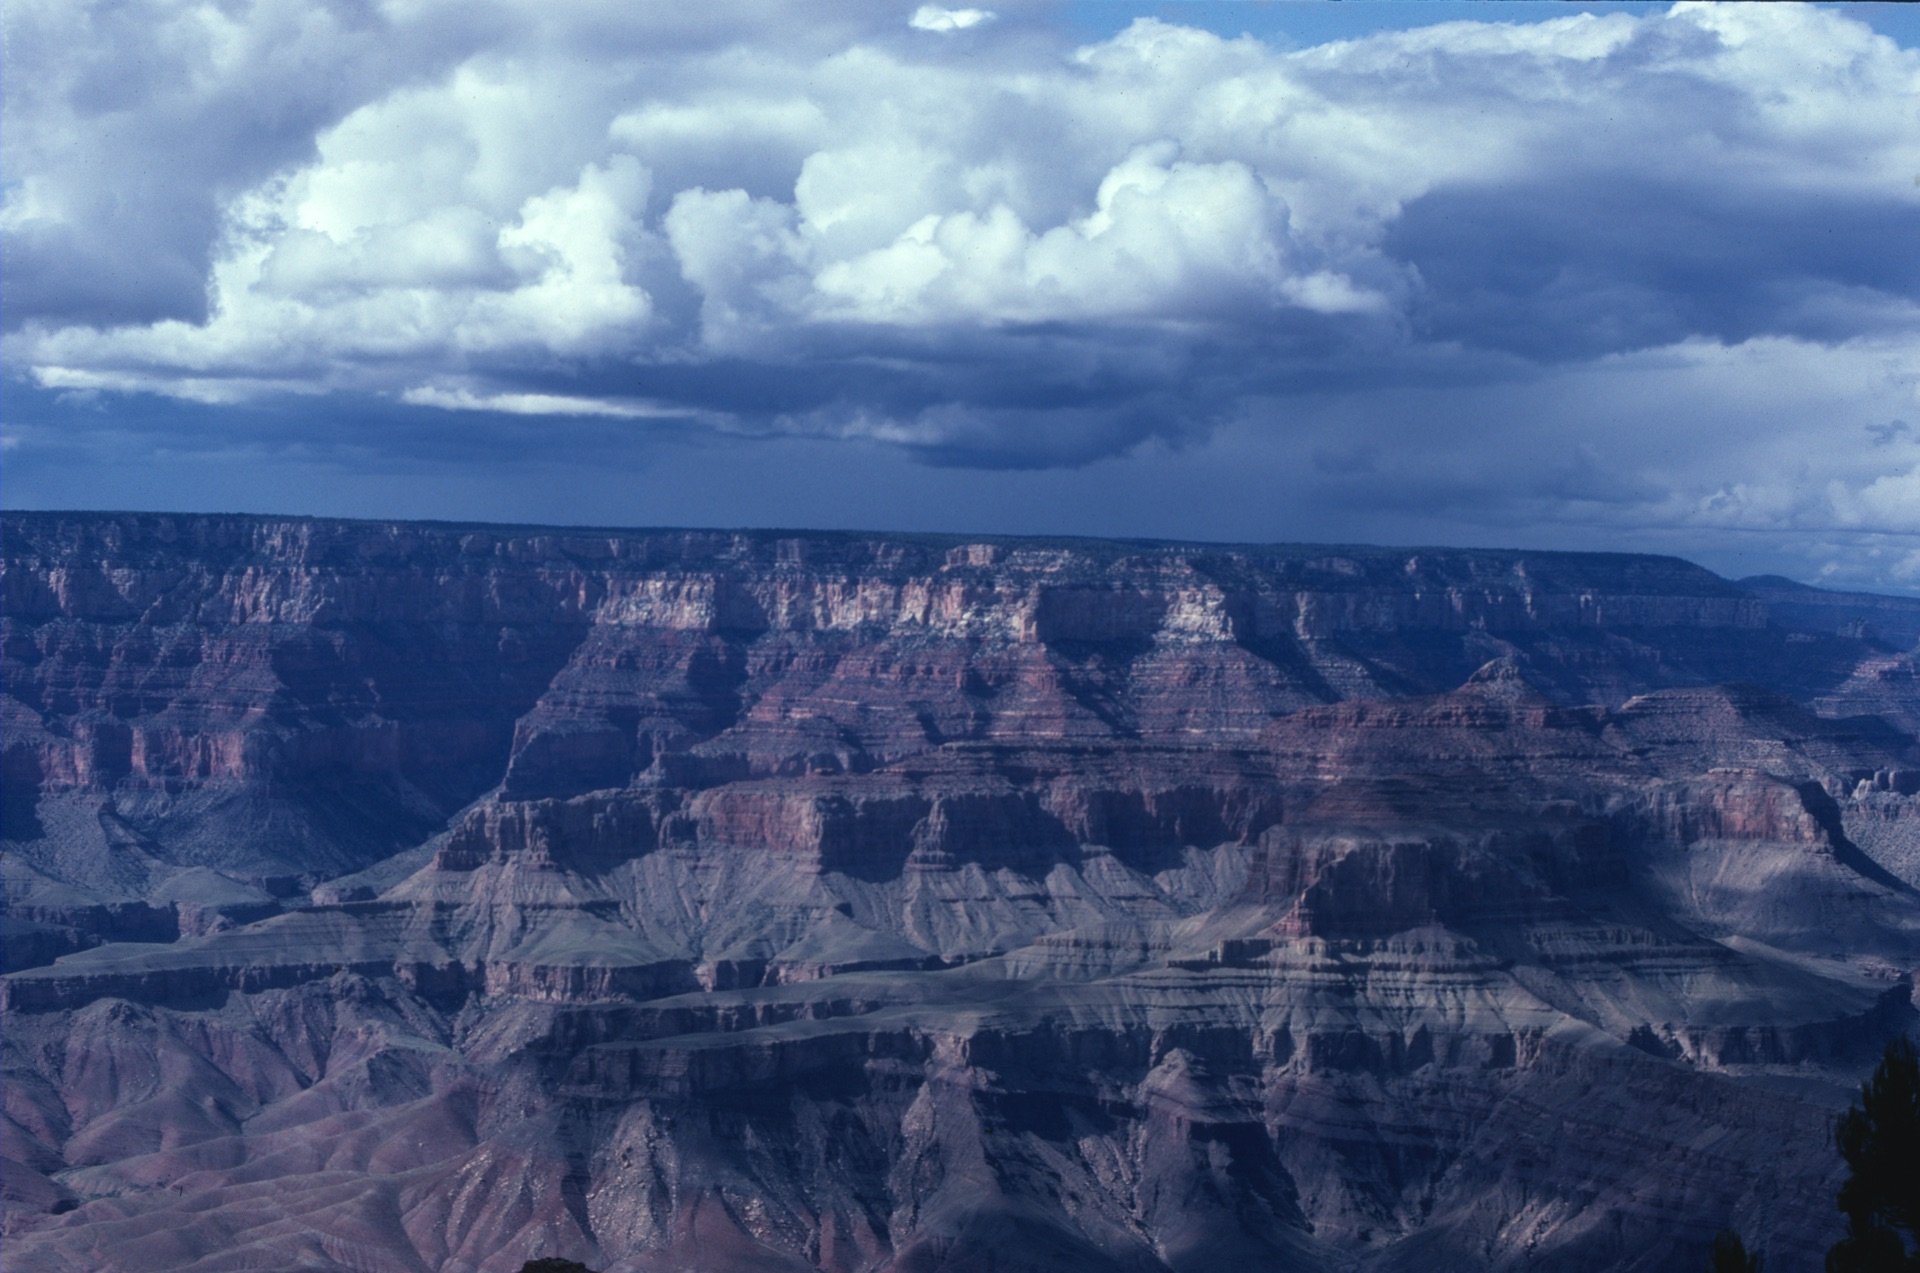 Low Hanging Clouds over Lipan Point